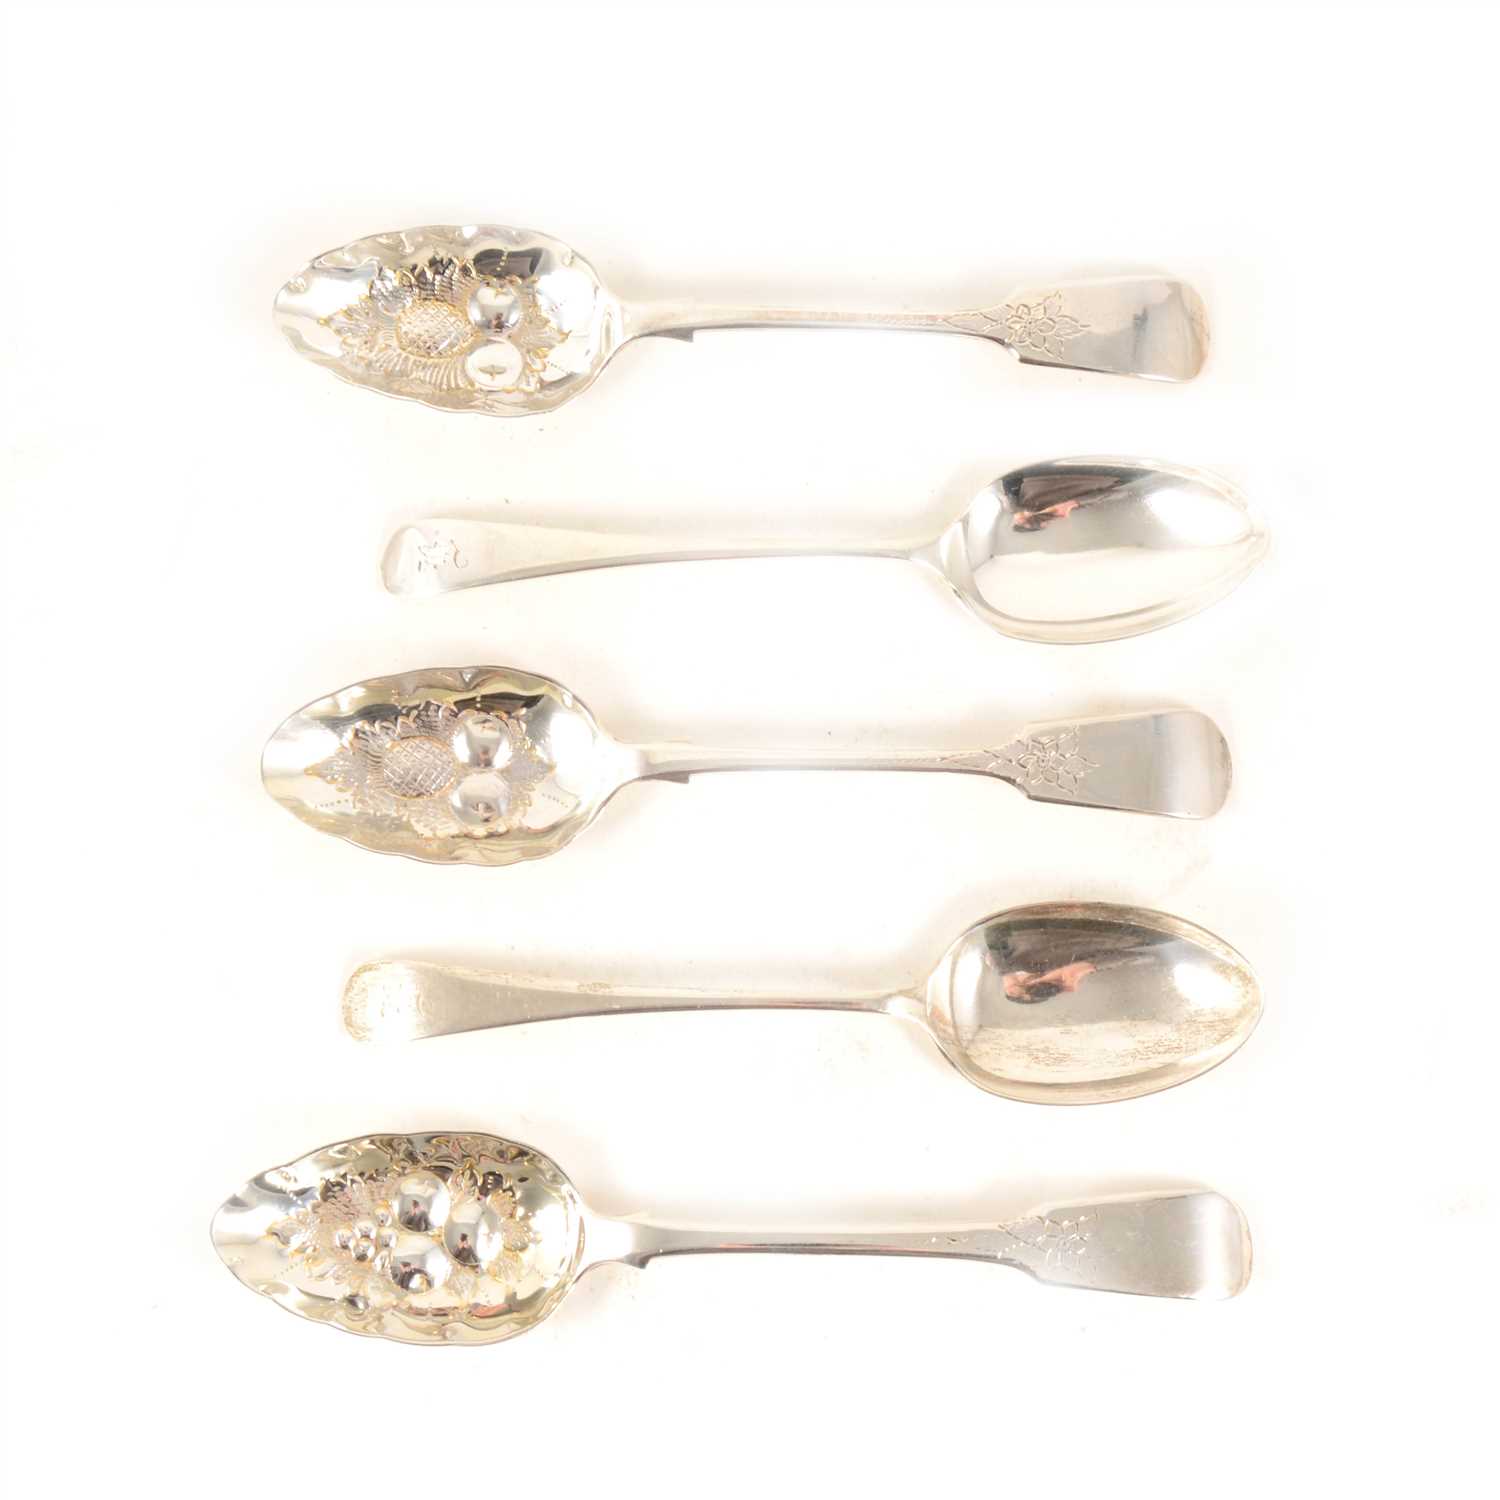 Lot 151 - Six silver tablespoons, various dates and makers, all with varying engraved initials ‘B’